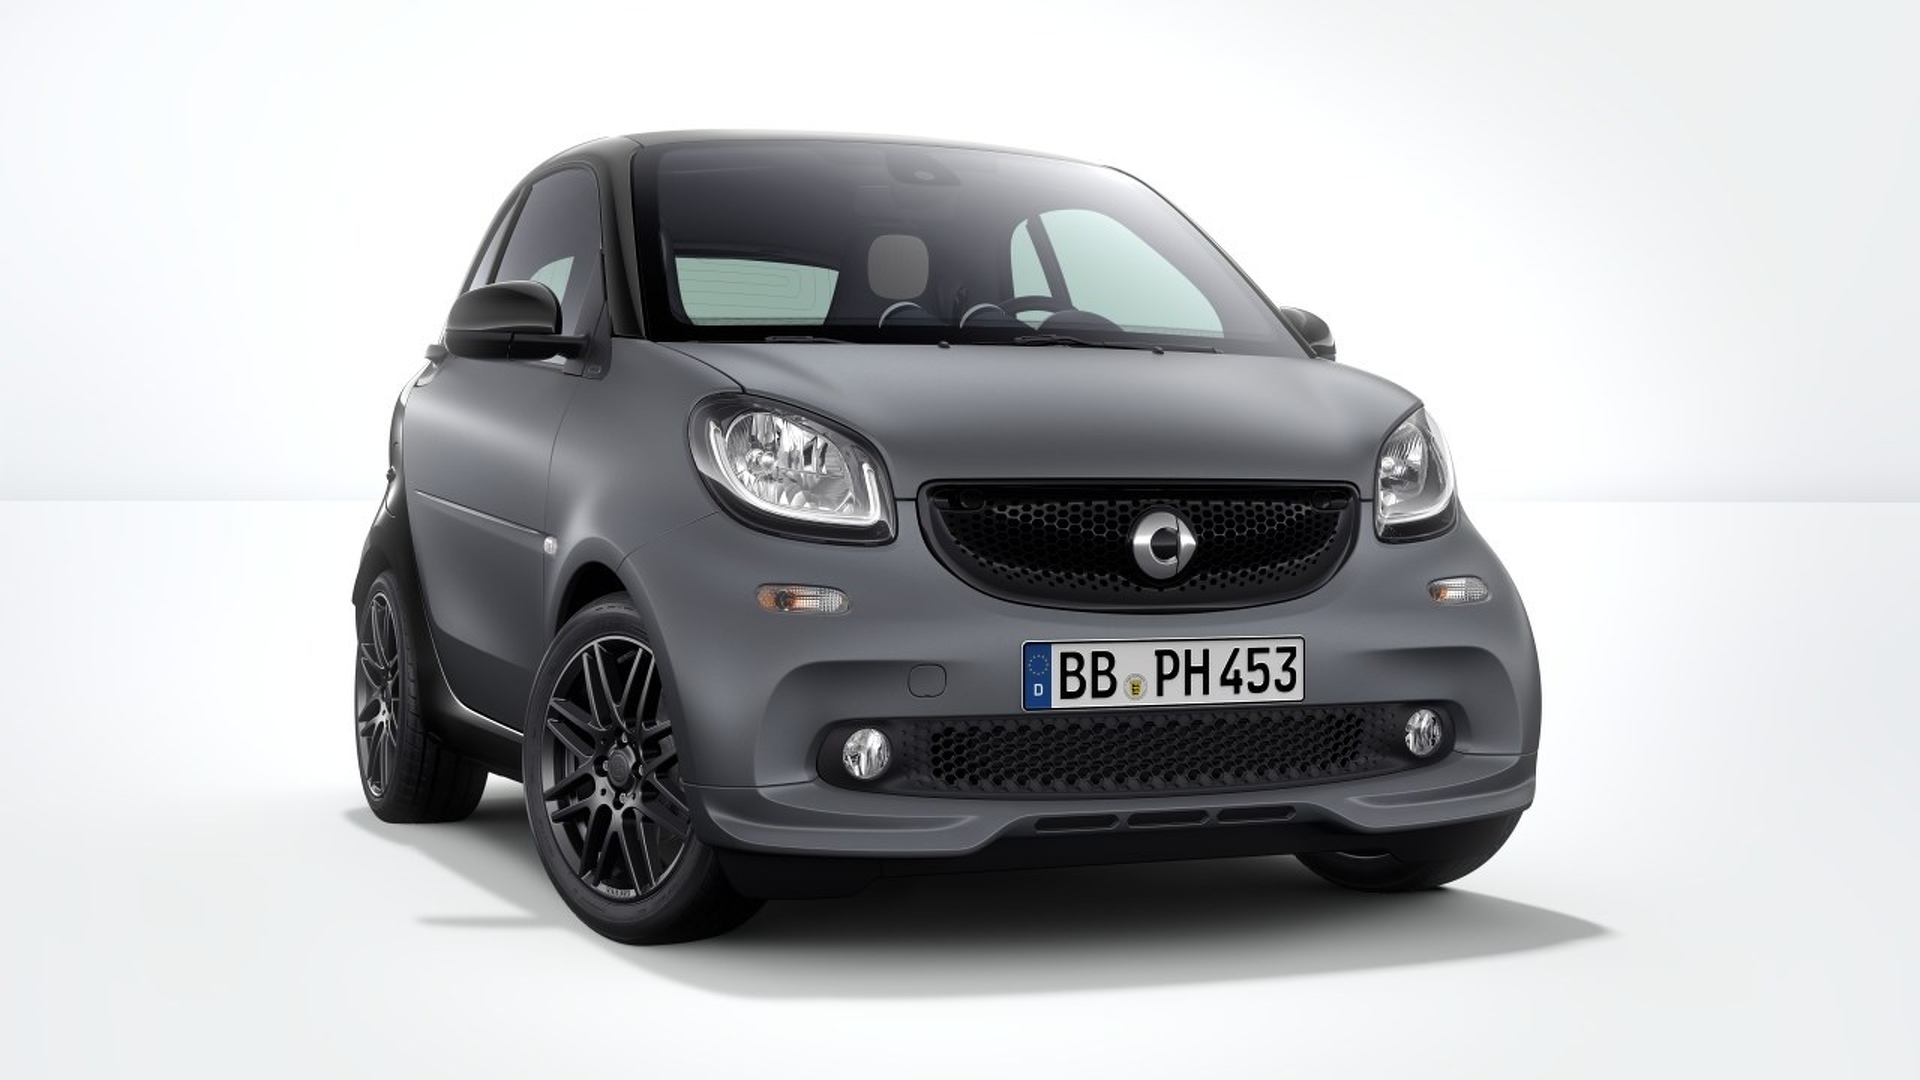 2017 Smart ForTwo Introduced with Brabus Sport Package - Automotorblog